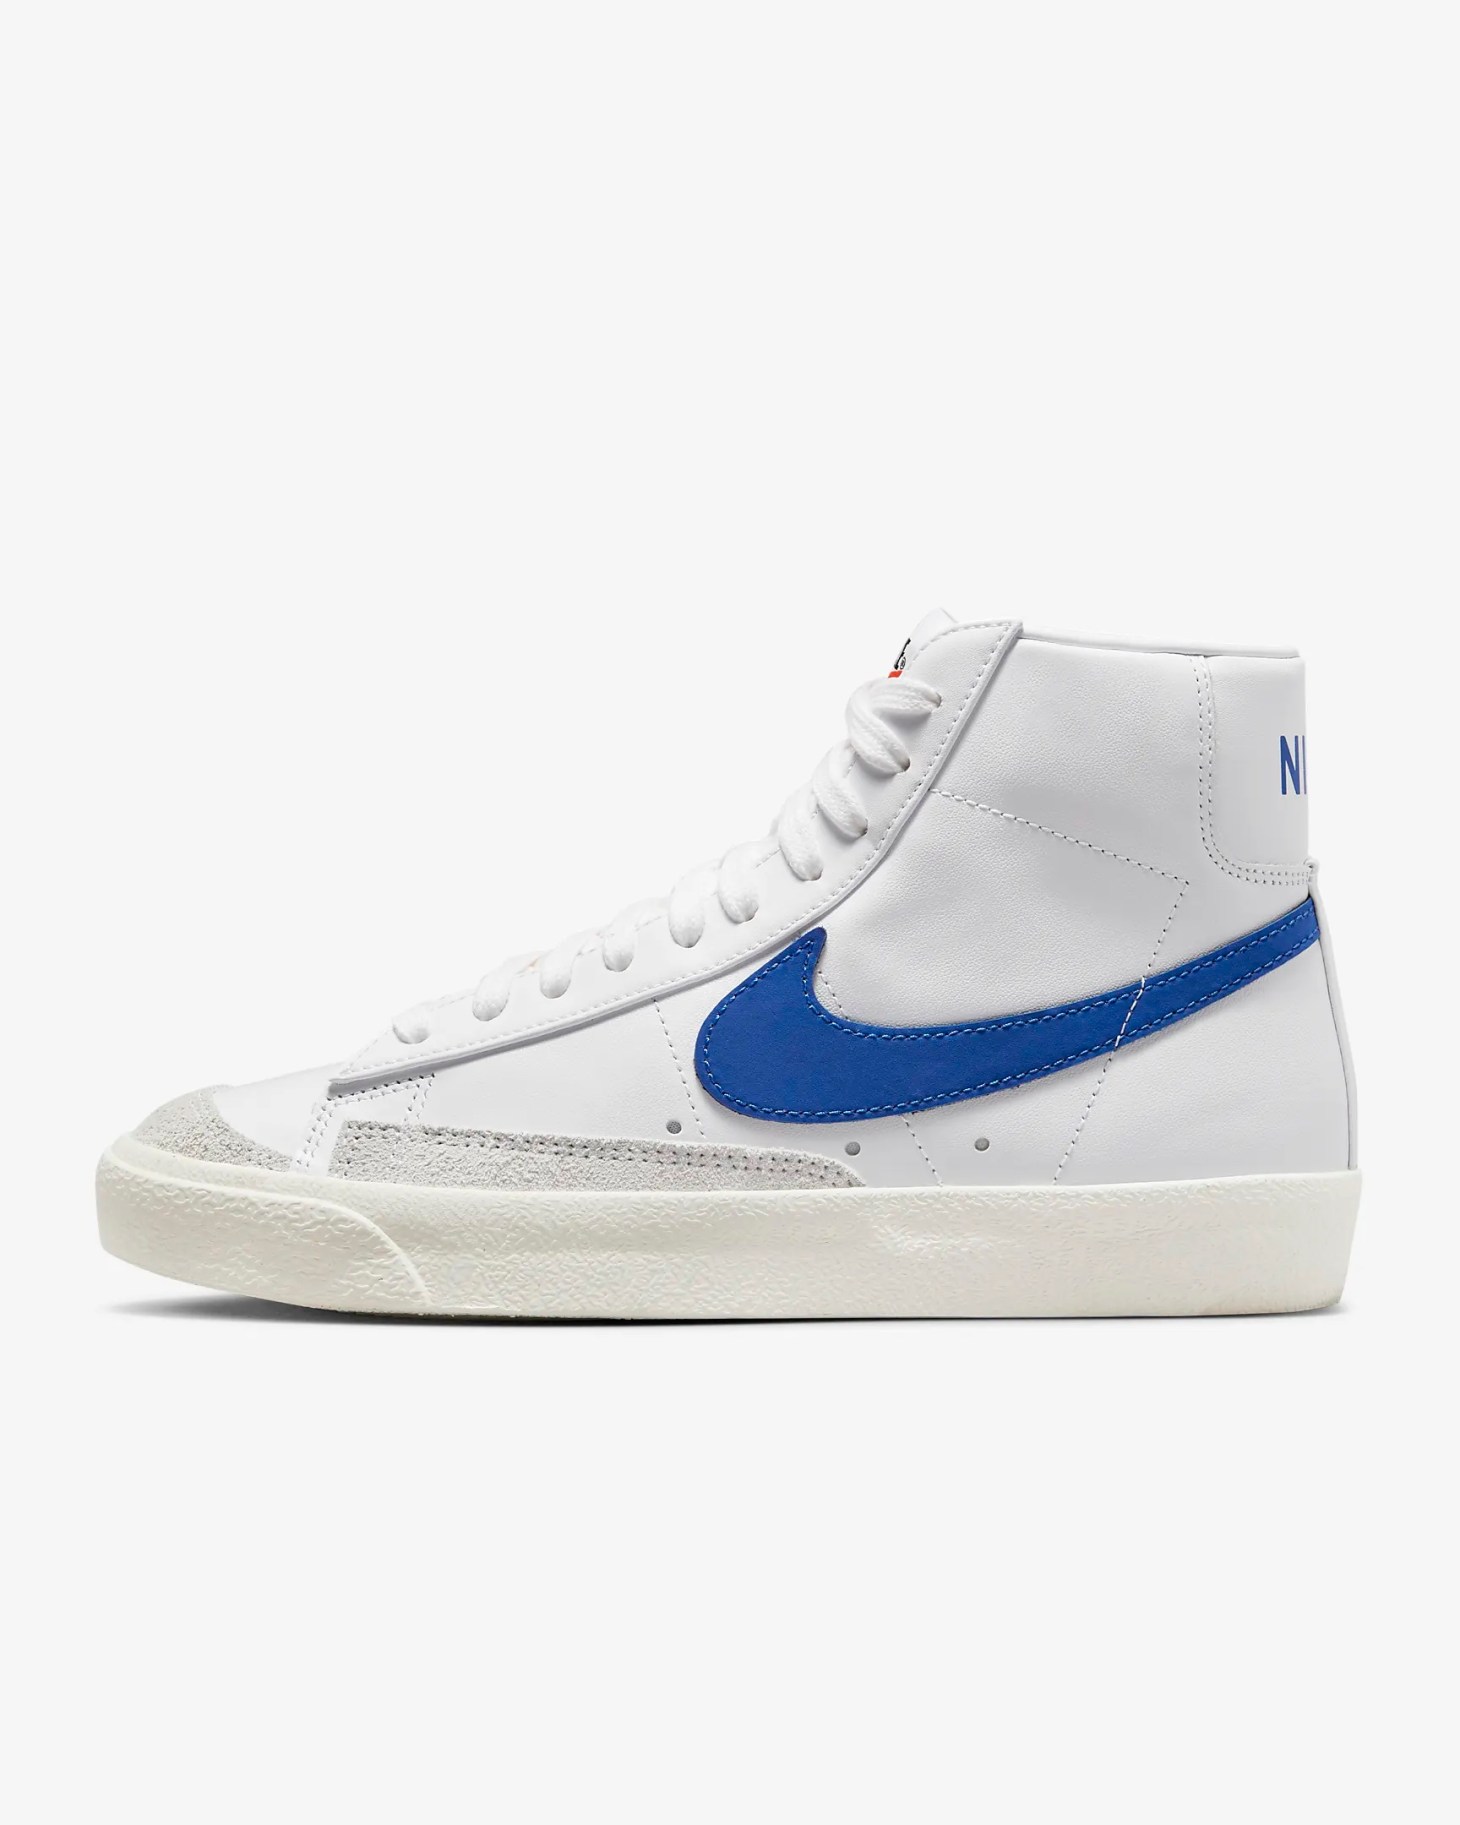 Nike Blazer Mid '77, best sneakers for ankle support